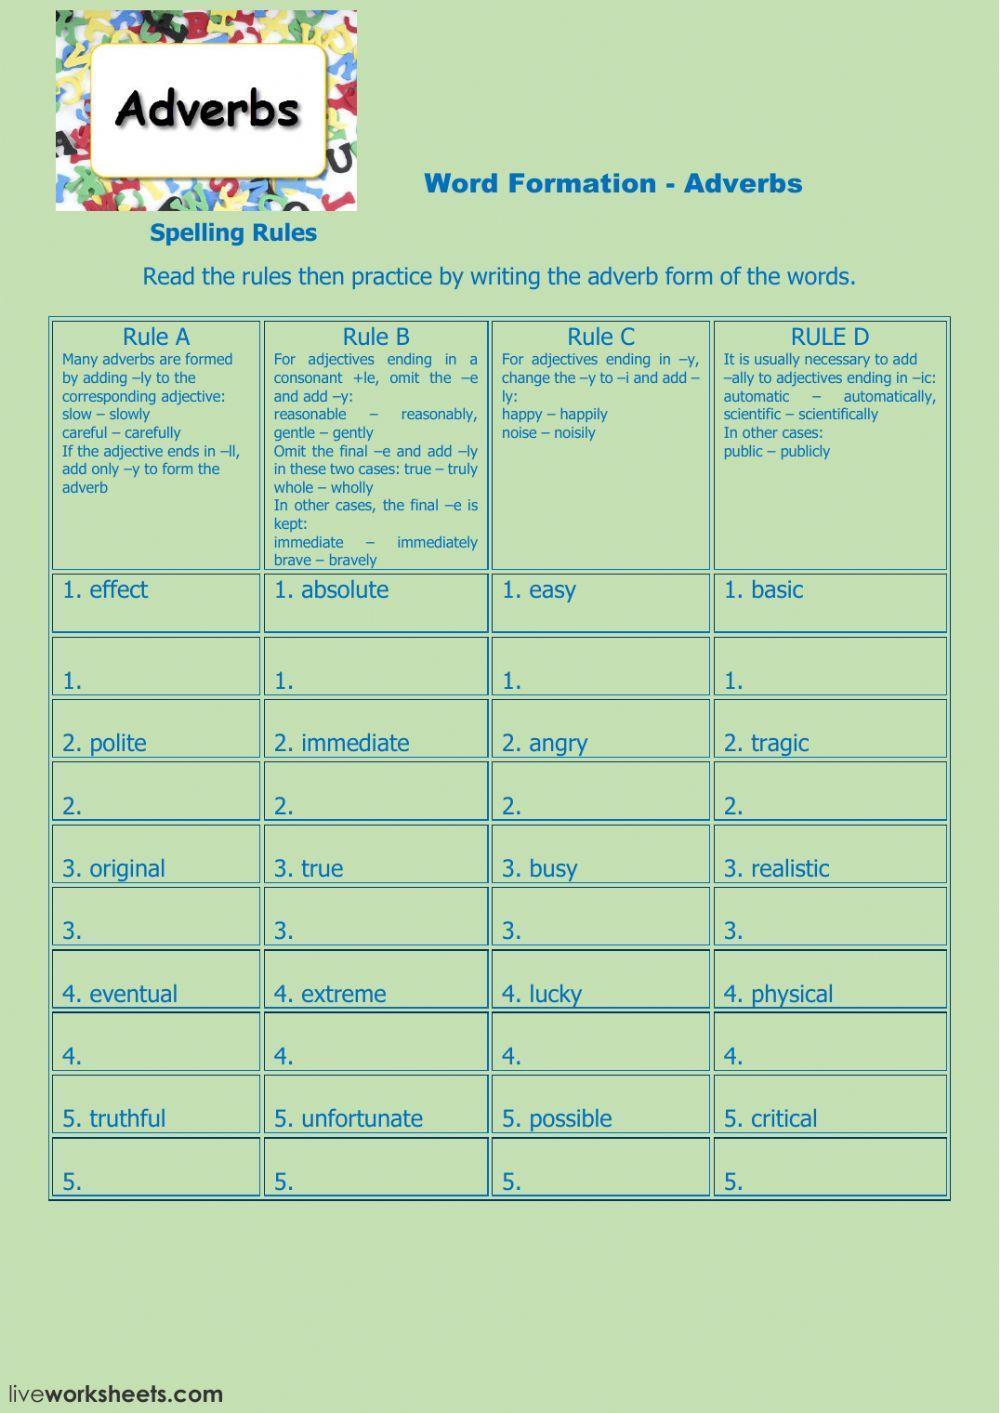 Word Formation Adverbs